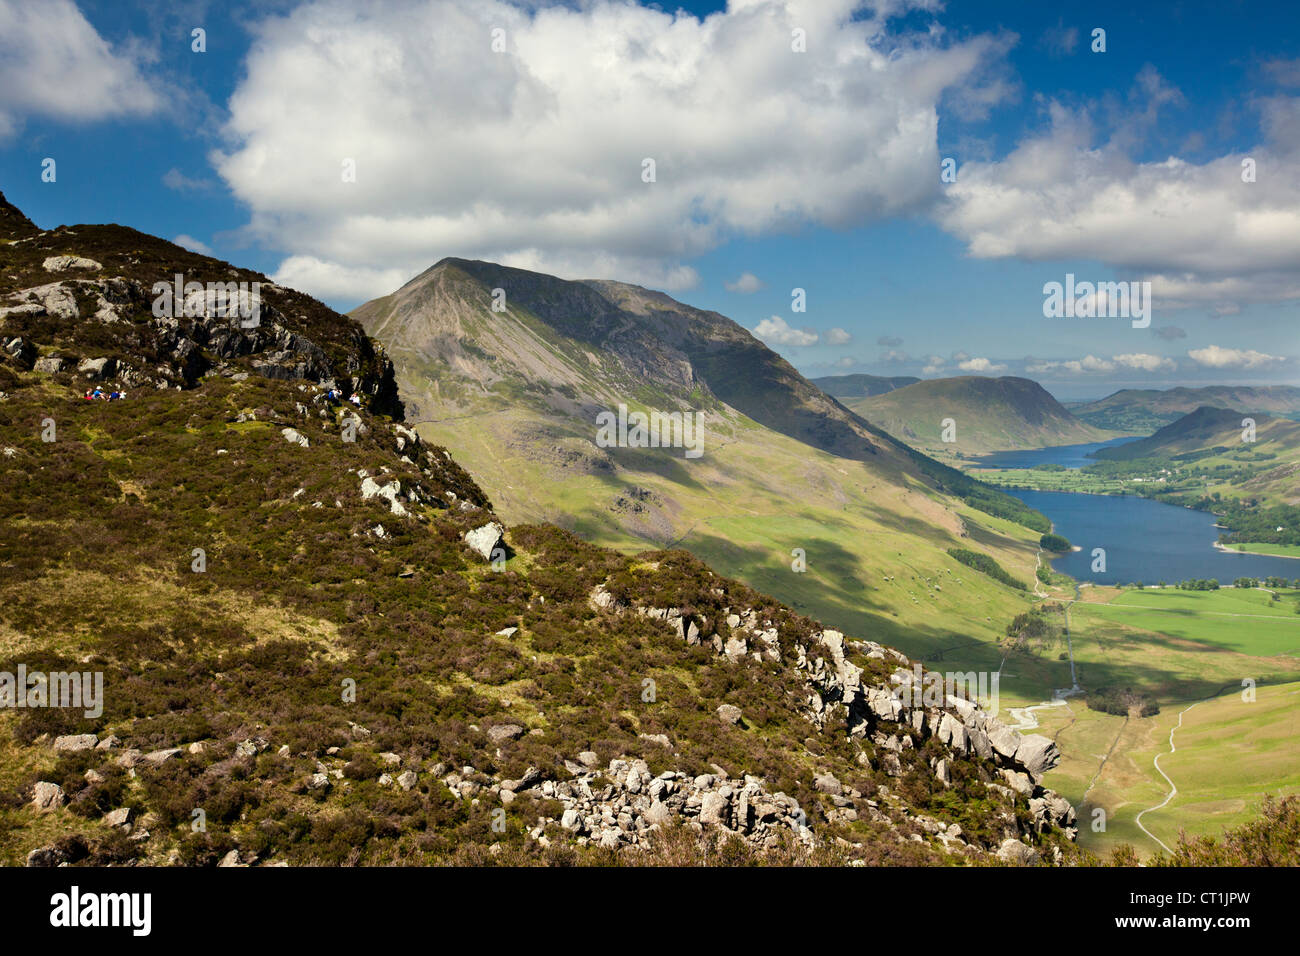 Buttermere And Red Pike Mountain Viewed From High On Haystacks Mountain, The Lake District Cumbria Lakeland England UK Stock Photo